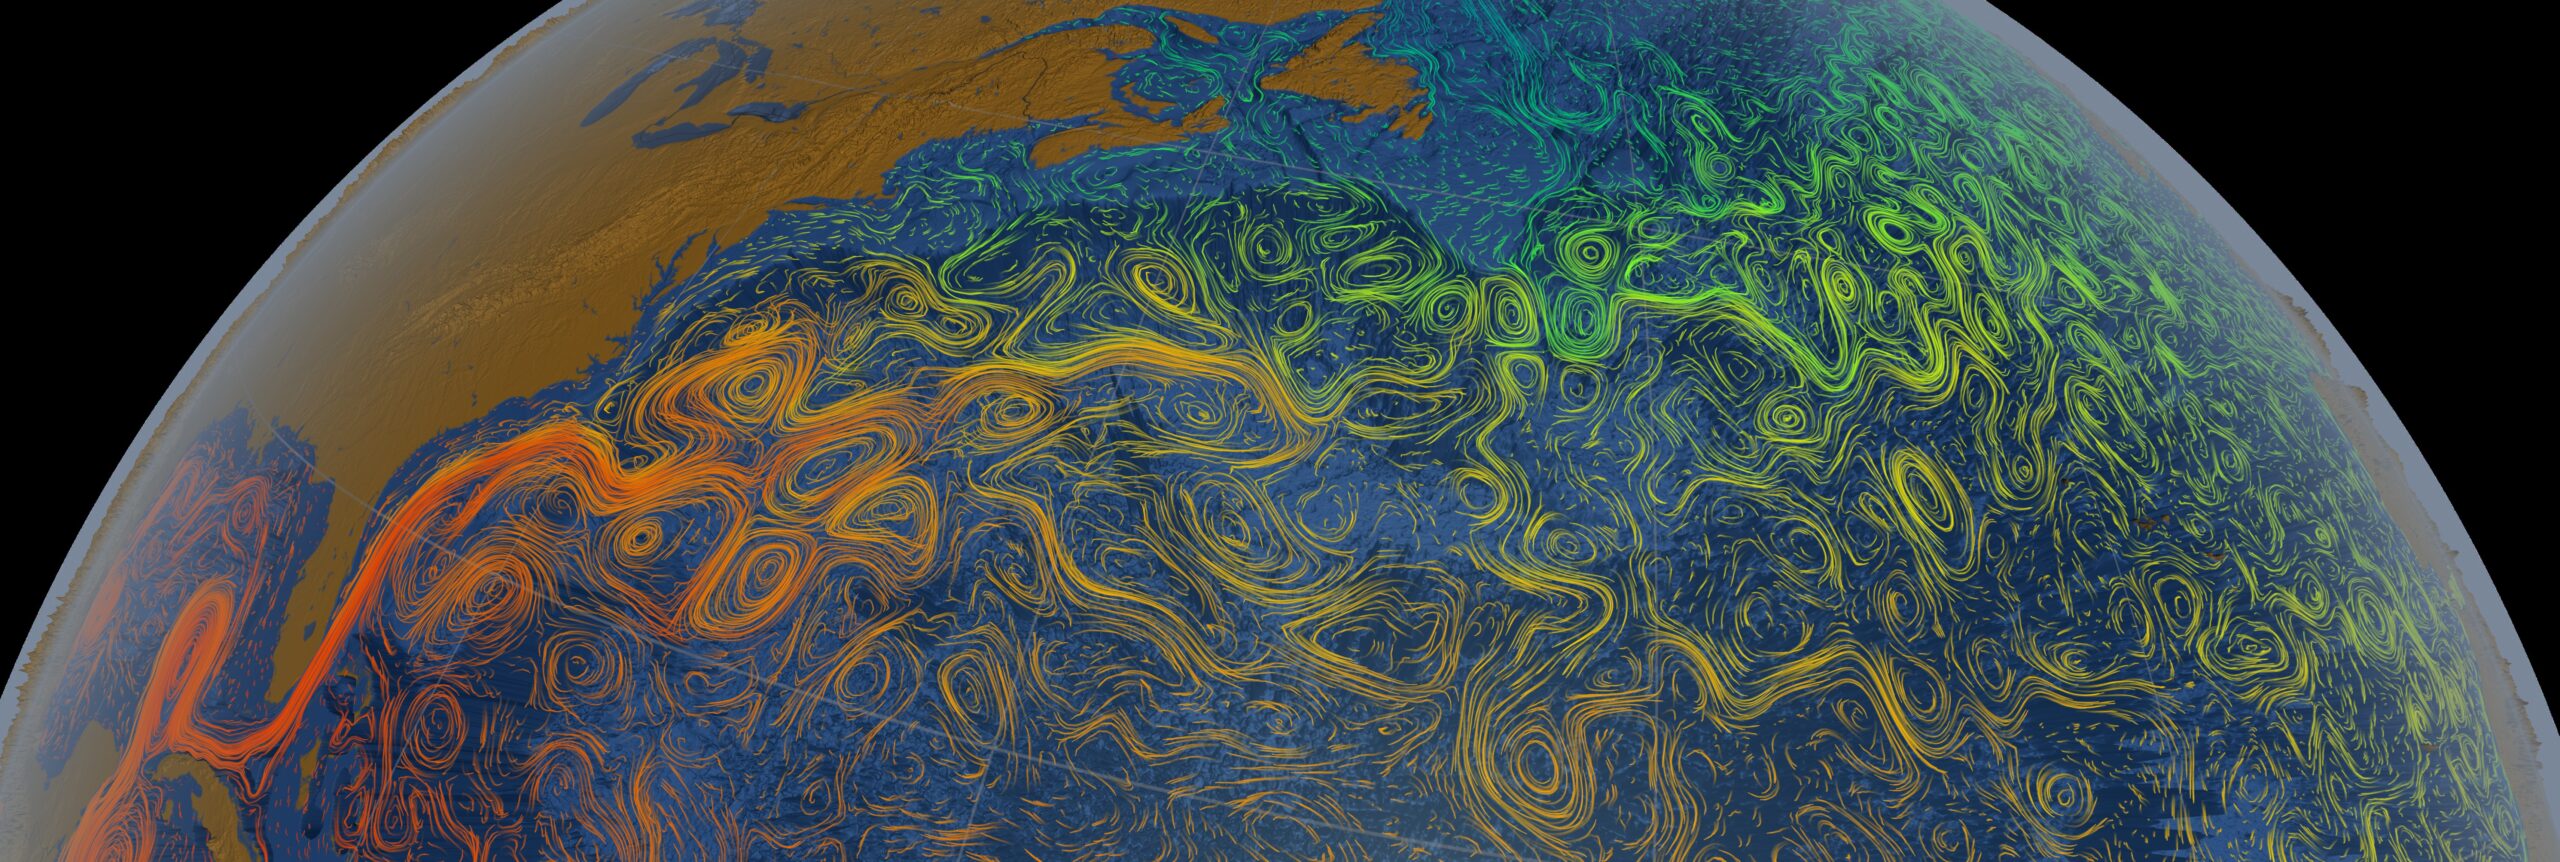 This visualization shows the Gulf Stream (ocean flows are colored with sea surface temperature data) stretching from the Gulf of Mexico all the way over towards Western Europe (by Greg Shirah - Lead Animator, Horace Mitchell - Animator, Hong Zhang - Scientist, Dimitris Menemenlis - Scientist, Courtesy NASA/Goddard Space Flight Center Scientific Visualization Studio, Public Domain).